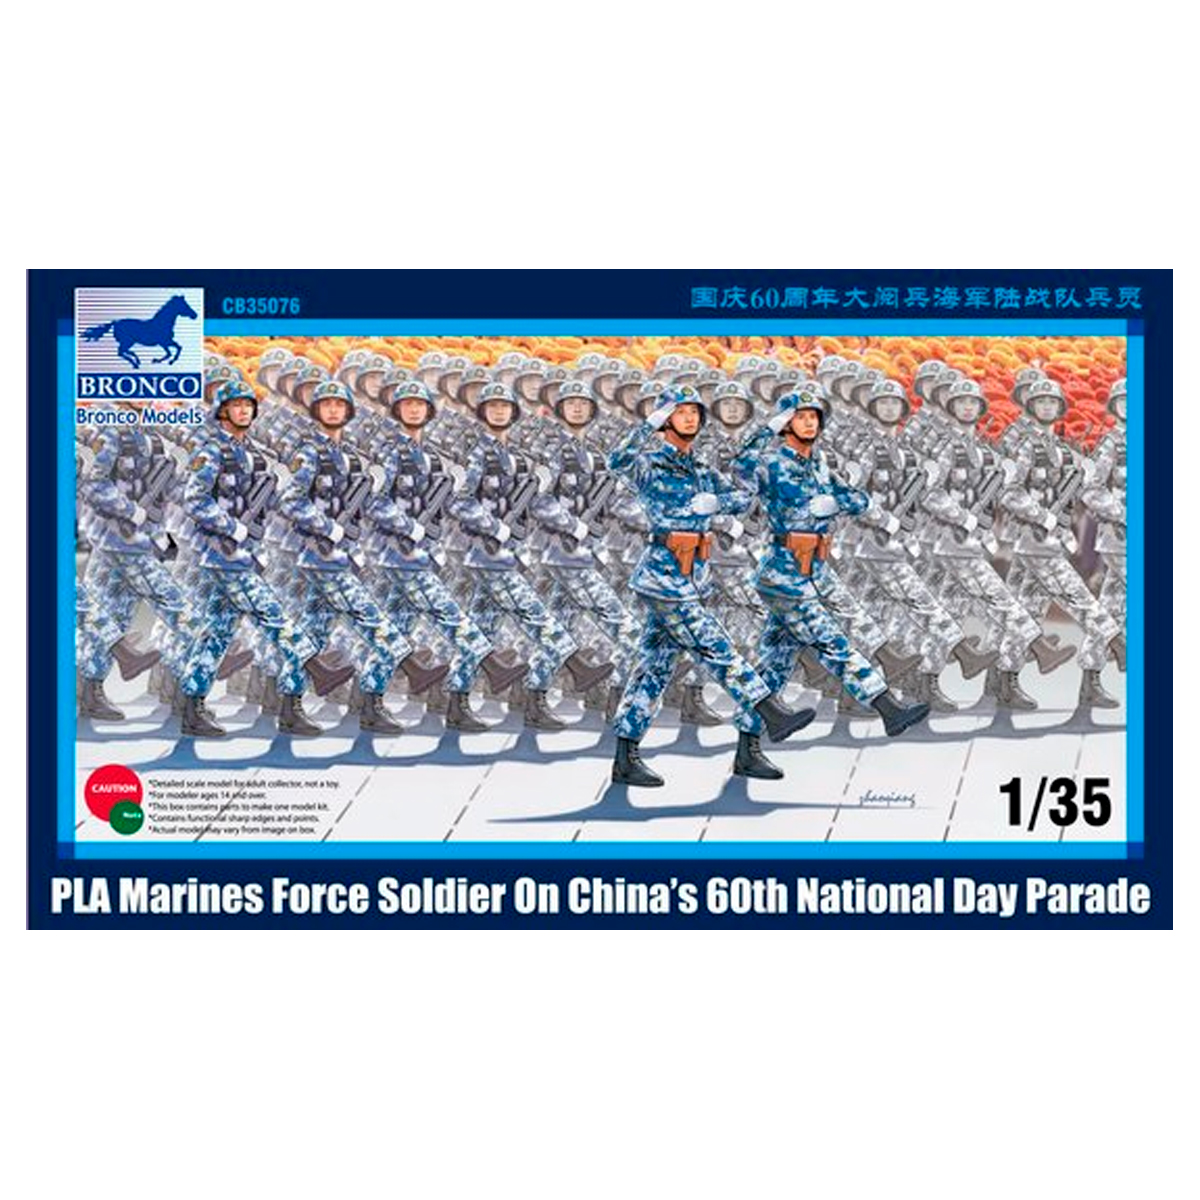 1/35 PLA Marines Force Soldier on China’s 60th National Day Parade